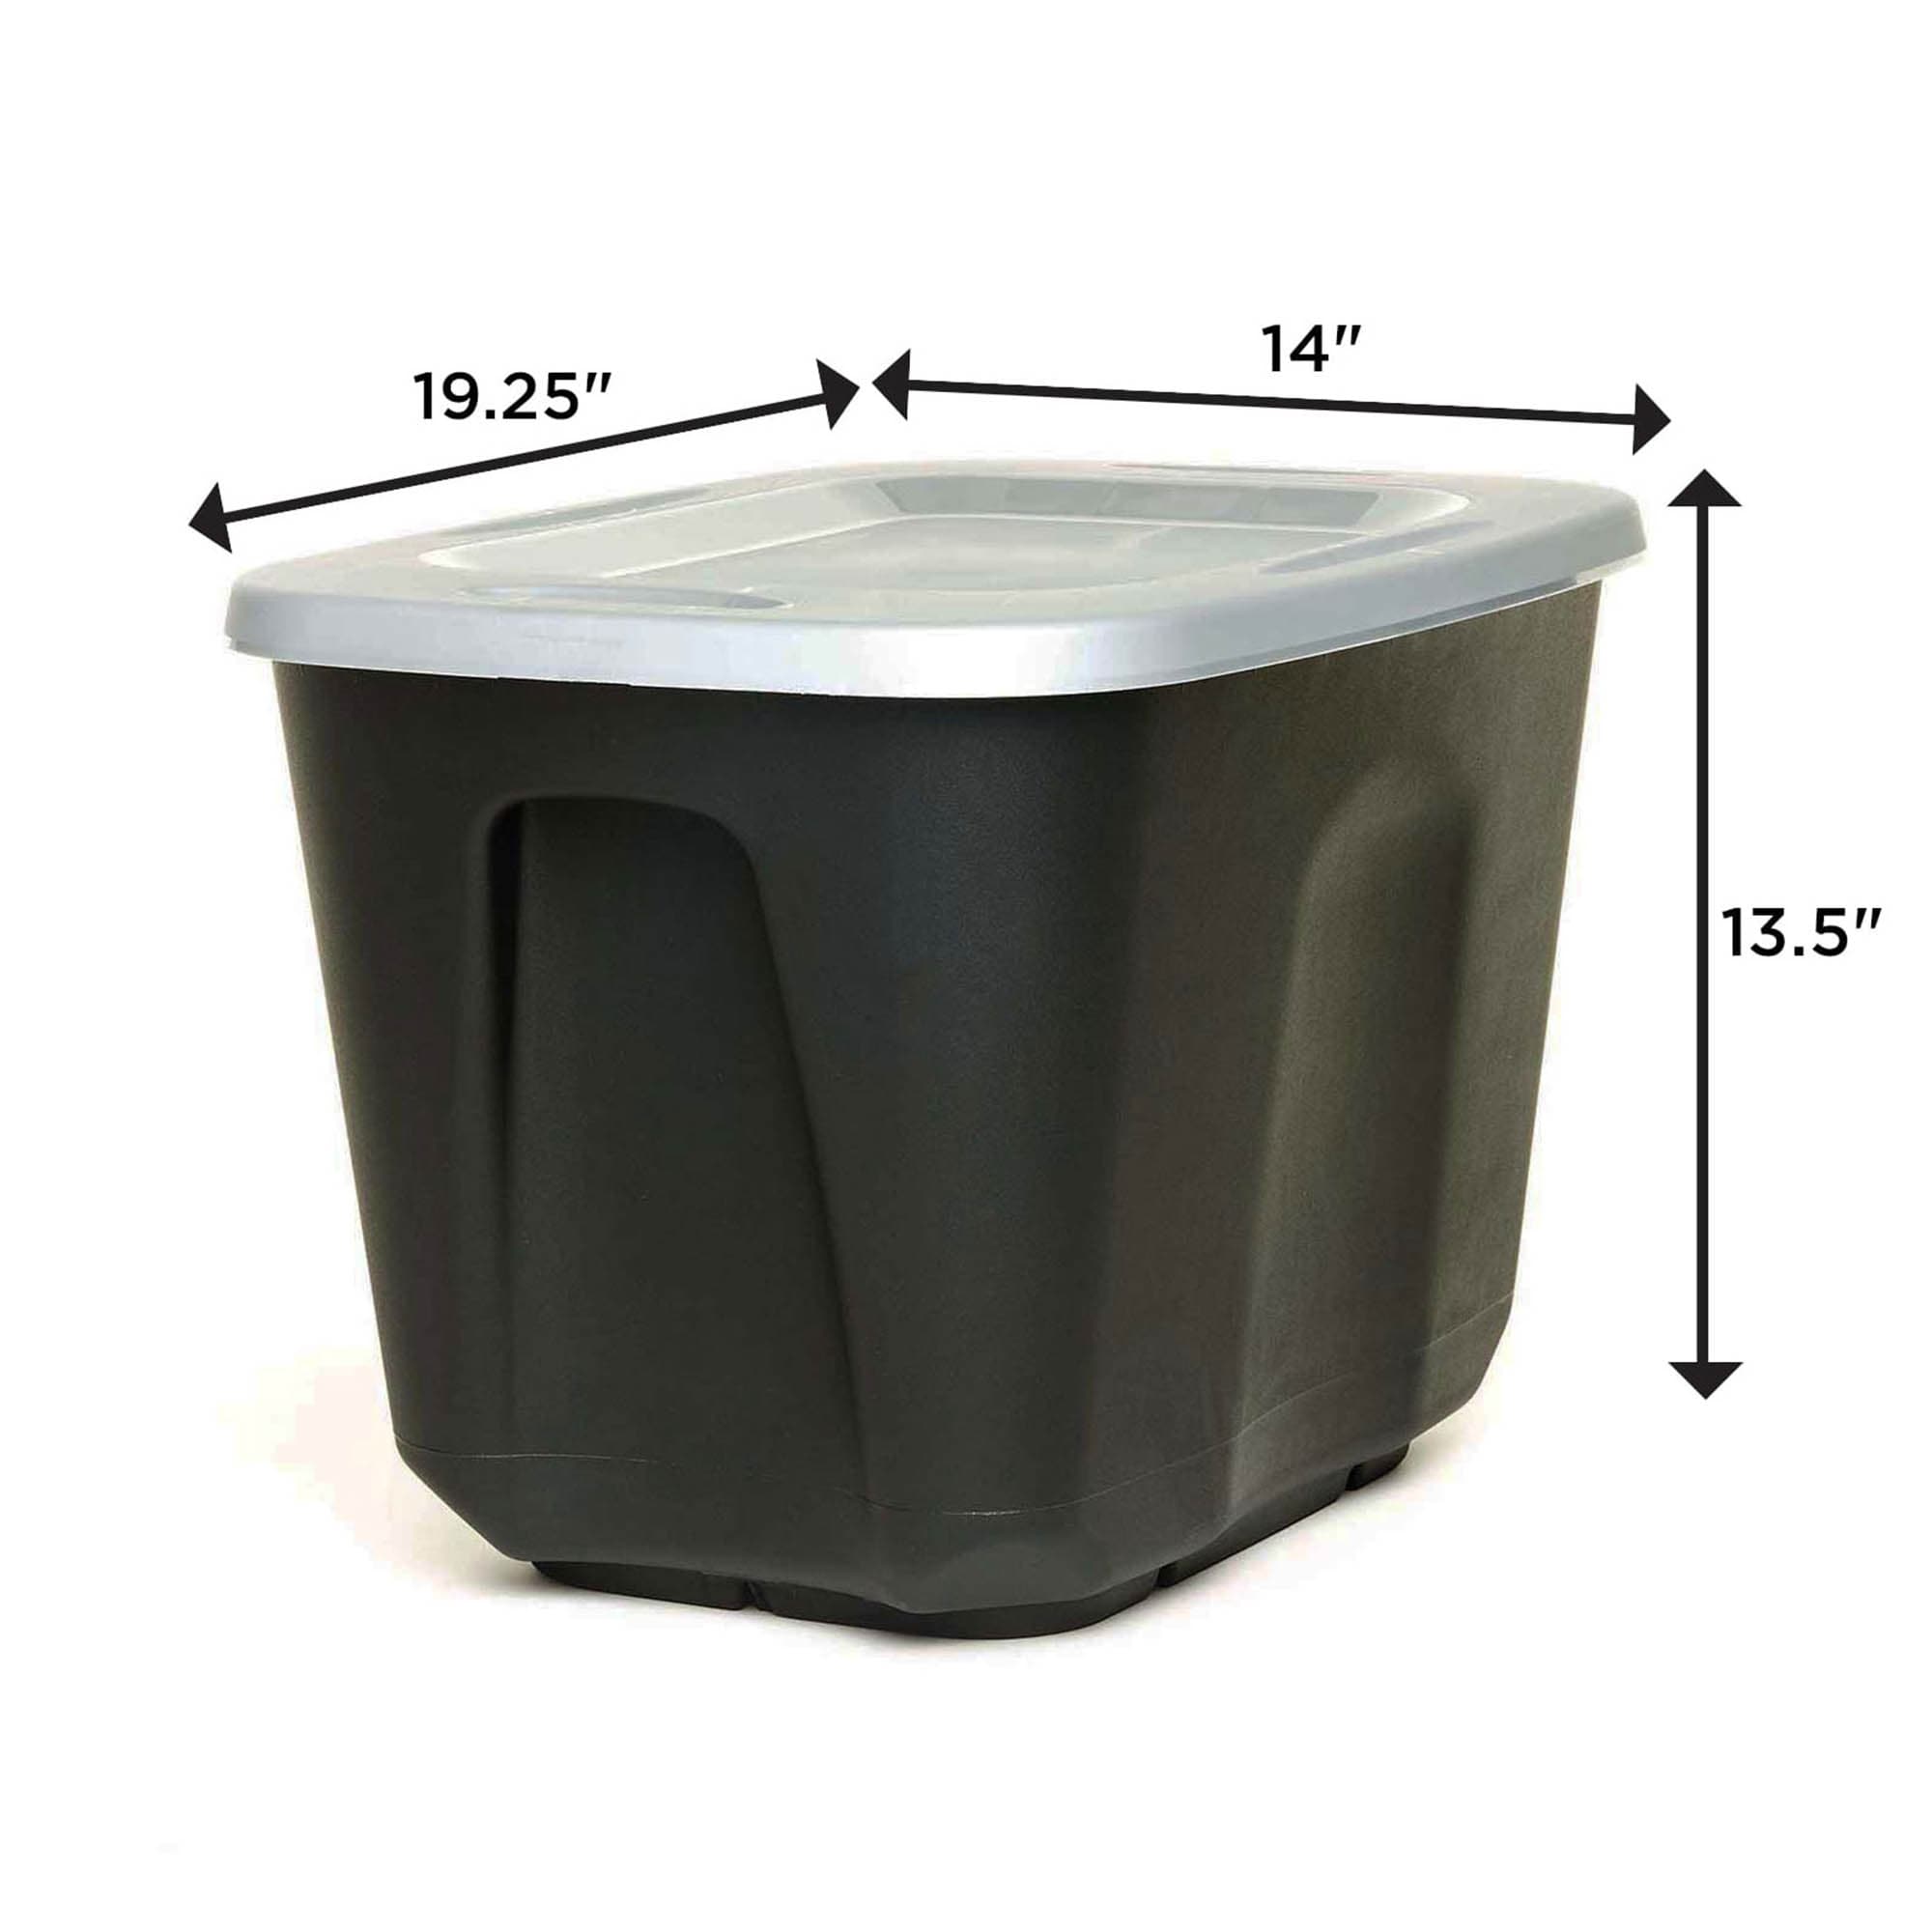 Homz Products Large Snap Black 10-Gallons (40-Quart) Tote at Lid with Standard